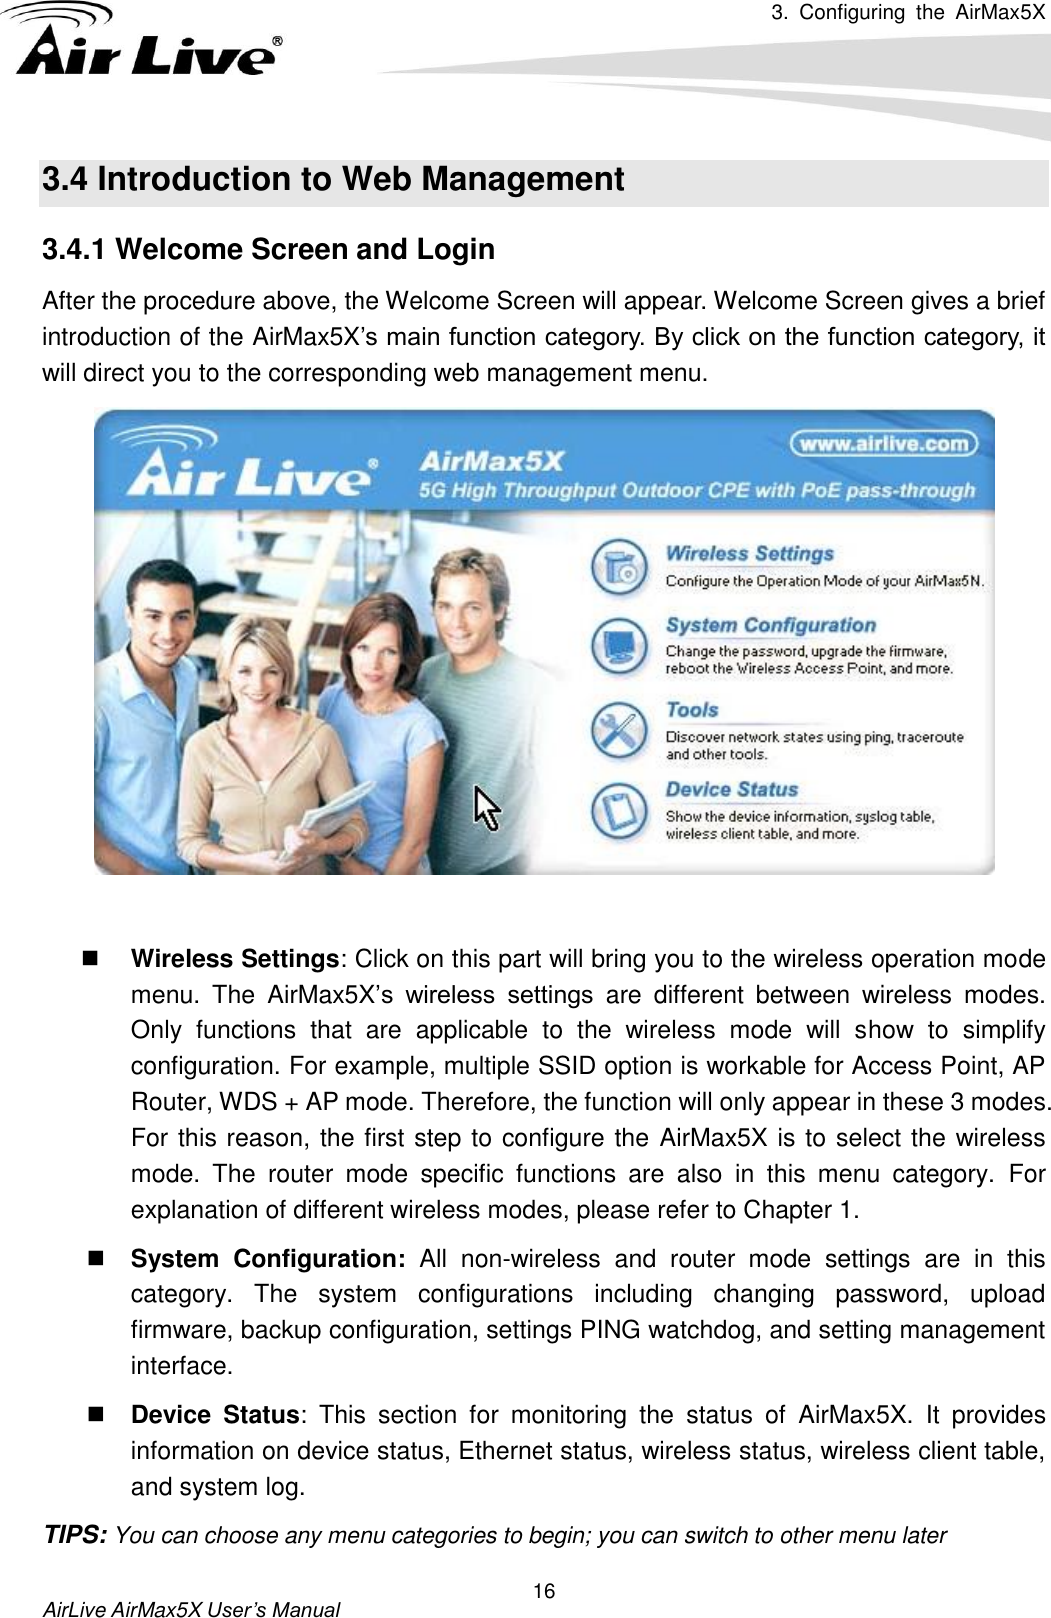 3.  Configuring  the  AirMax5X   AirLive AirMax5X User’s Manual 16 3.4 Introduction to Web Management 3.4.1 Welcome Screen and Login After the procedure above, the Welcome Screen will appear. Welcome Screen gives a brief introduction of the AirMax5X’s main function category. By click on the function category, it will direct you to the corresponding web management menu.    Wireless Settings: Click on this part will bring you to the wireless operation mode menu.  The  AirMax5X’s  wireless  settings  are  different  between  wireless  modes. Only  functions  that  are  applicable  to  the  wireless  mode  will  show  to  simplify configuration. For example, multiple SSID option is workable for Access Point, AP Router, WDS + AP mode. Therefore, the function will only appear in these 3 modes. For this reason, the first step to configure the  AirMax5X is to select the wireless mode.  The  router  mode  specific  functions  are  also  in  this  menu  category.  For explanation of different wireless modes, please refer to Chapter 1.  System  Configuration:  All  non-wireless  and  router  mode  settings  are  in  this category.  The  system  configurations  including  changing  password,  upload firmware, backup configuration, settings PING watchdog, and setting management interface.    Device  Status:  This  section  for  monitoring  the  status  of  AirMax5X.  It  provides information on device status, Ethernet status, wireless status, wireless client table, and system log. TIPS: You can choose any menu categories to begin; you can switch to other menu later 